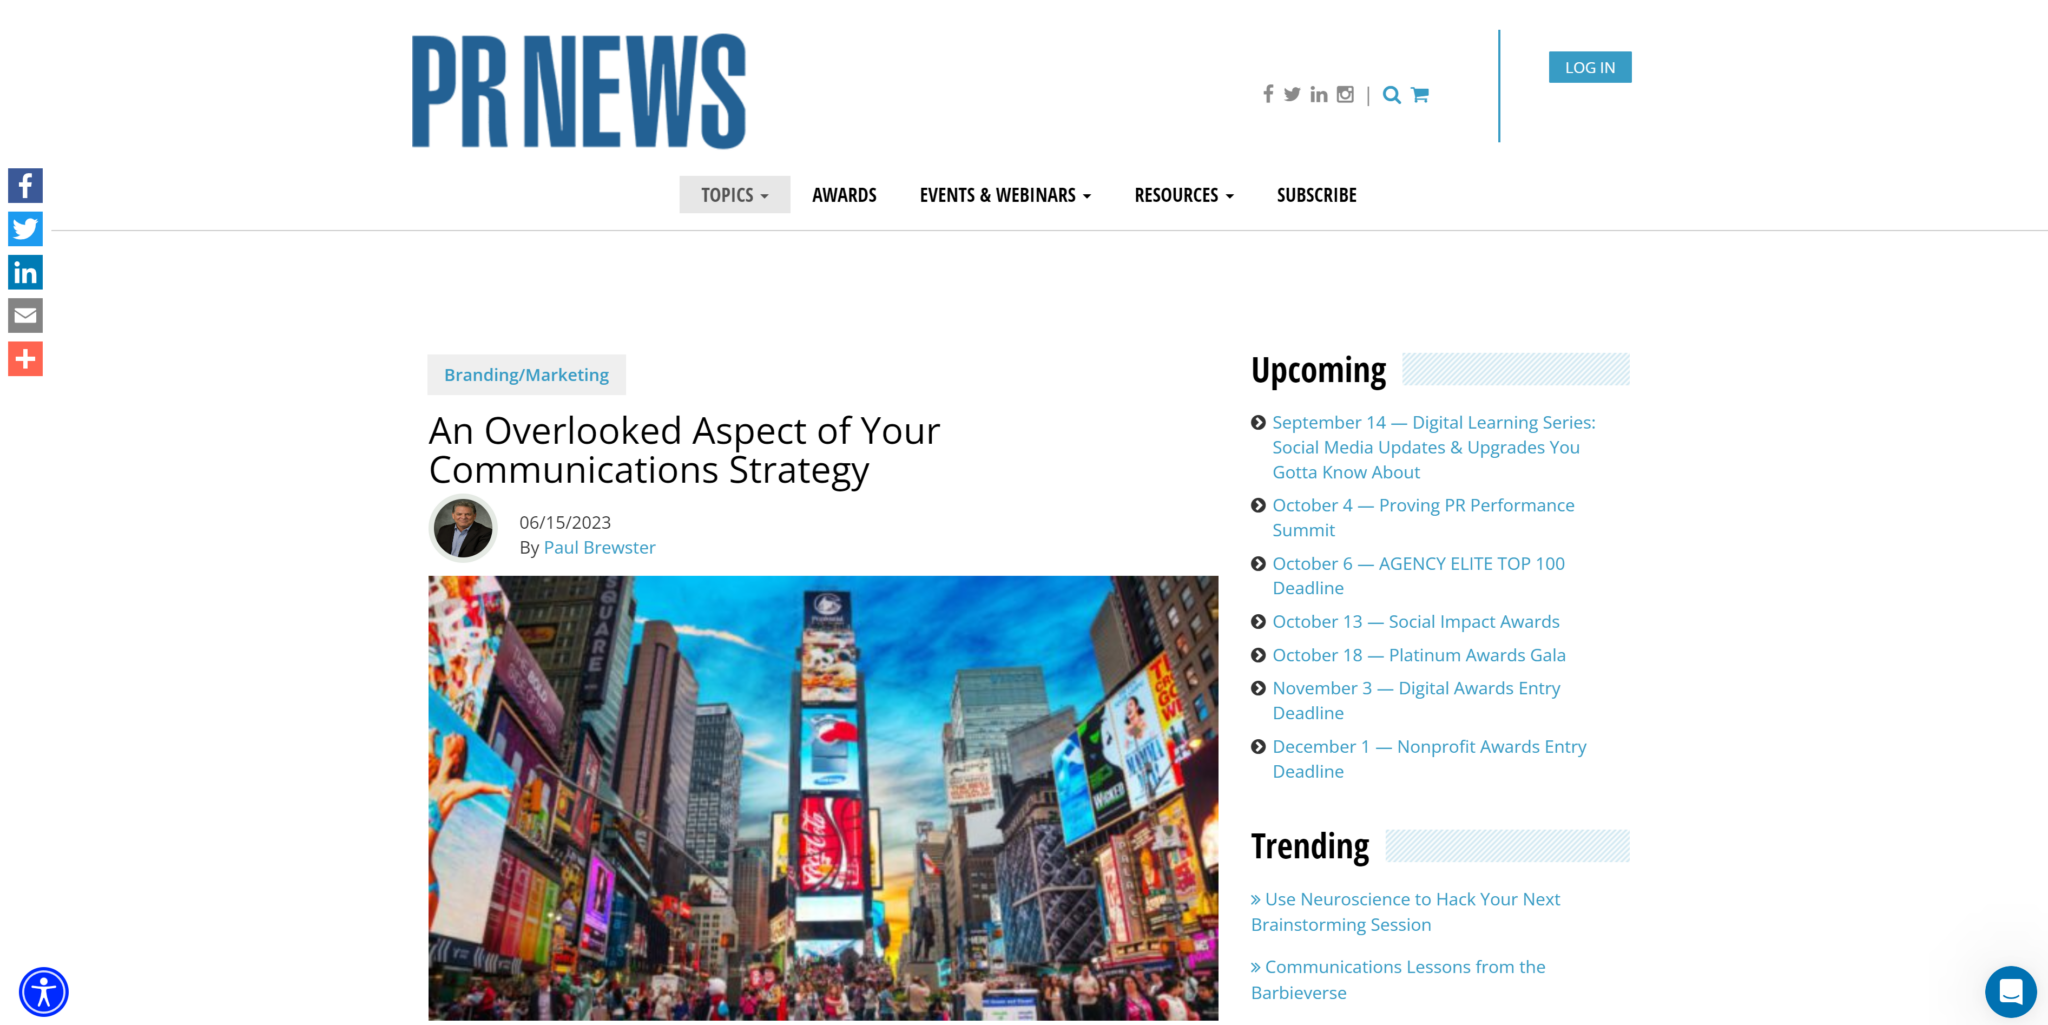 SpeedPro's CEO Paul Brewster interviewed by PR NEWS in article titled "An Overlooked Aspect of Your Communications Strategy"